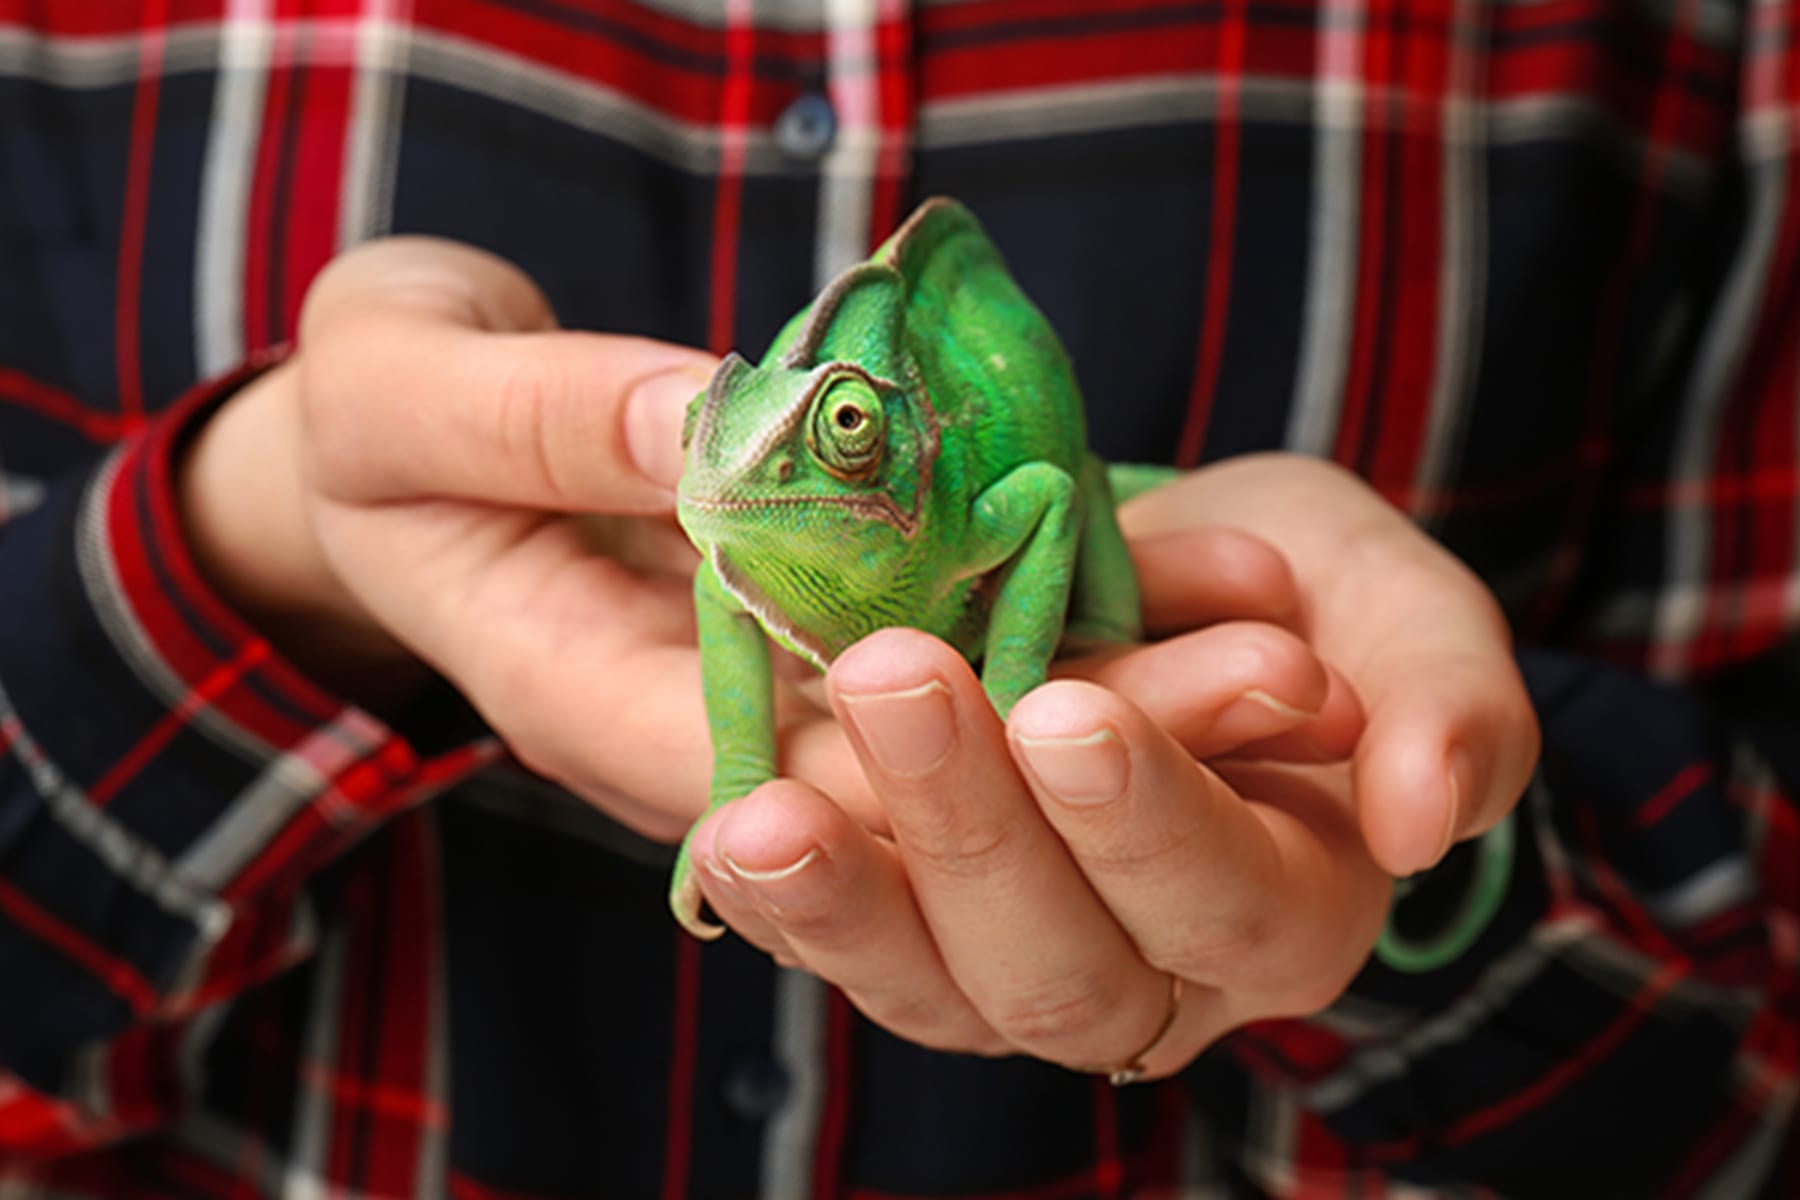 Chameleon being held in a hand